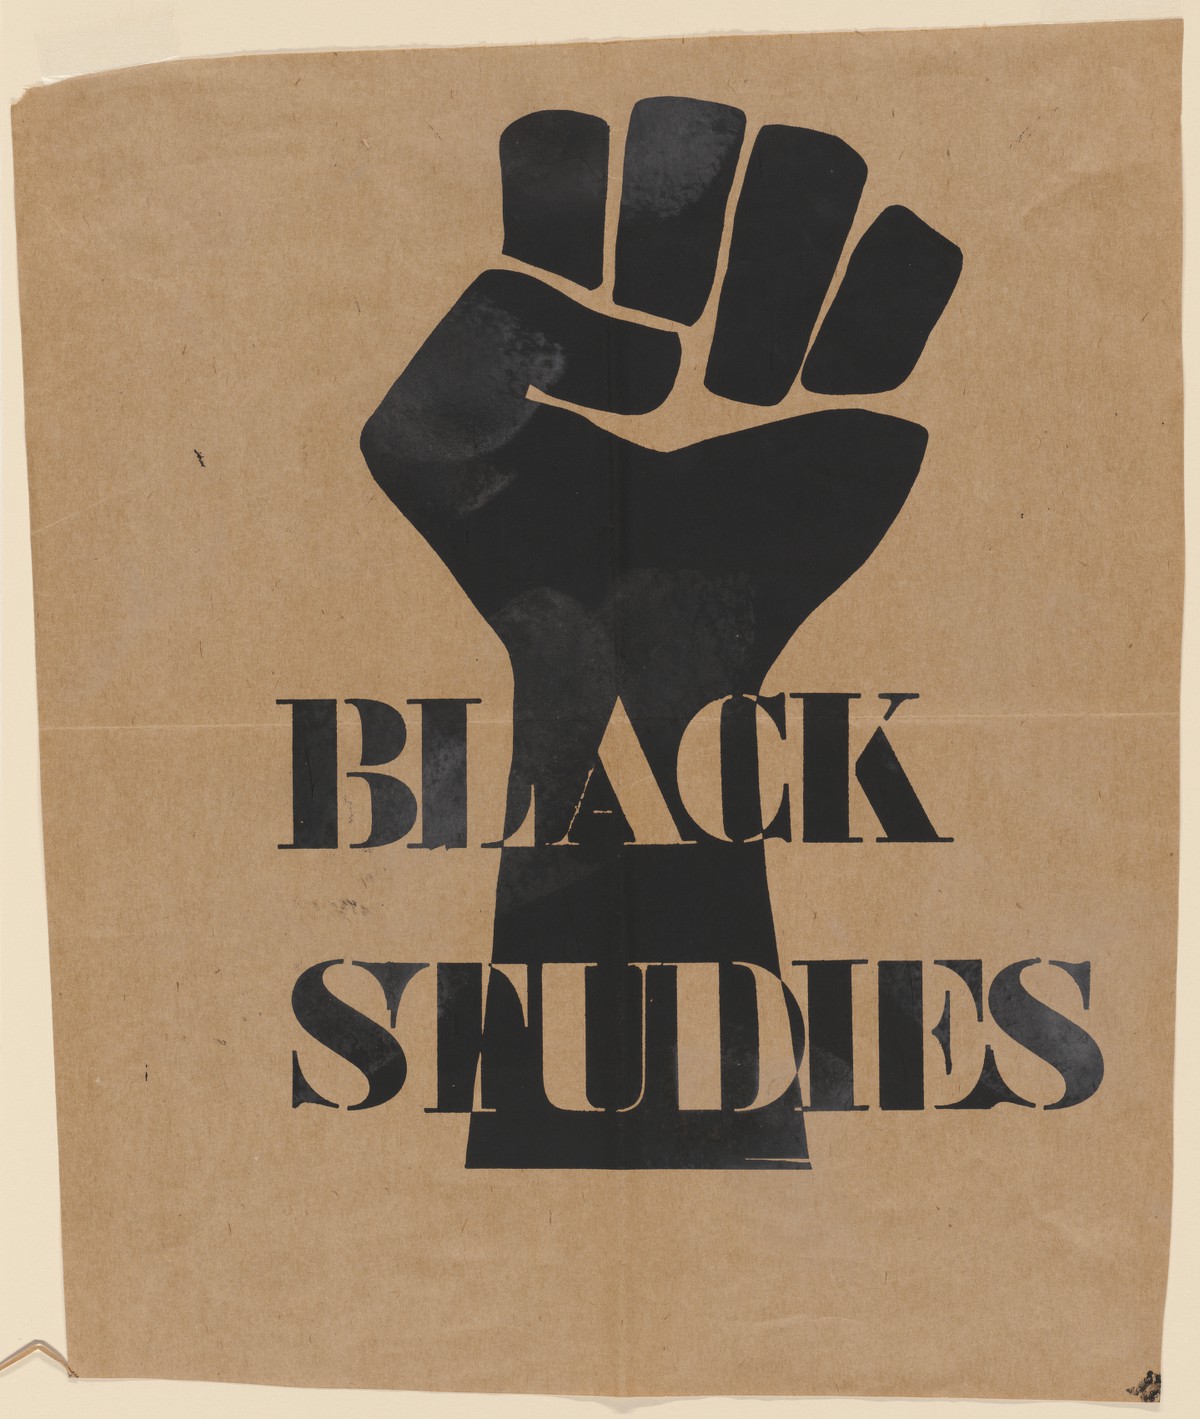 Rethinking Black Studies as a Freedom Project